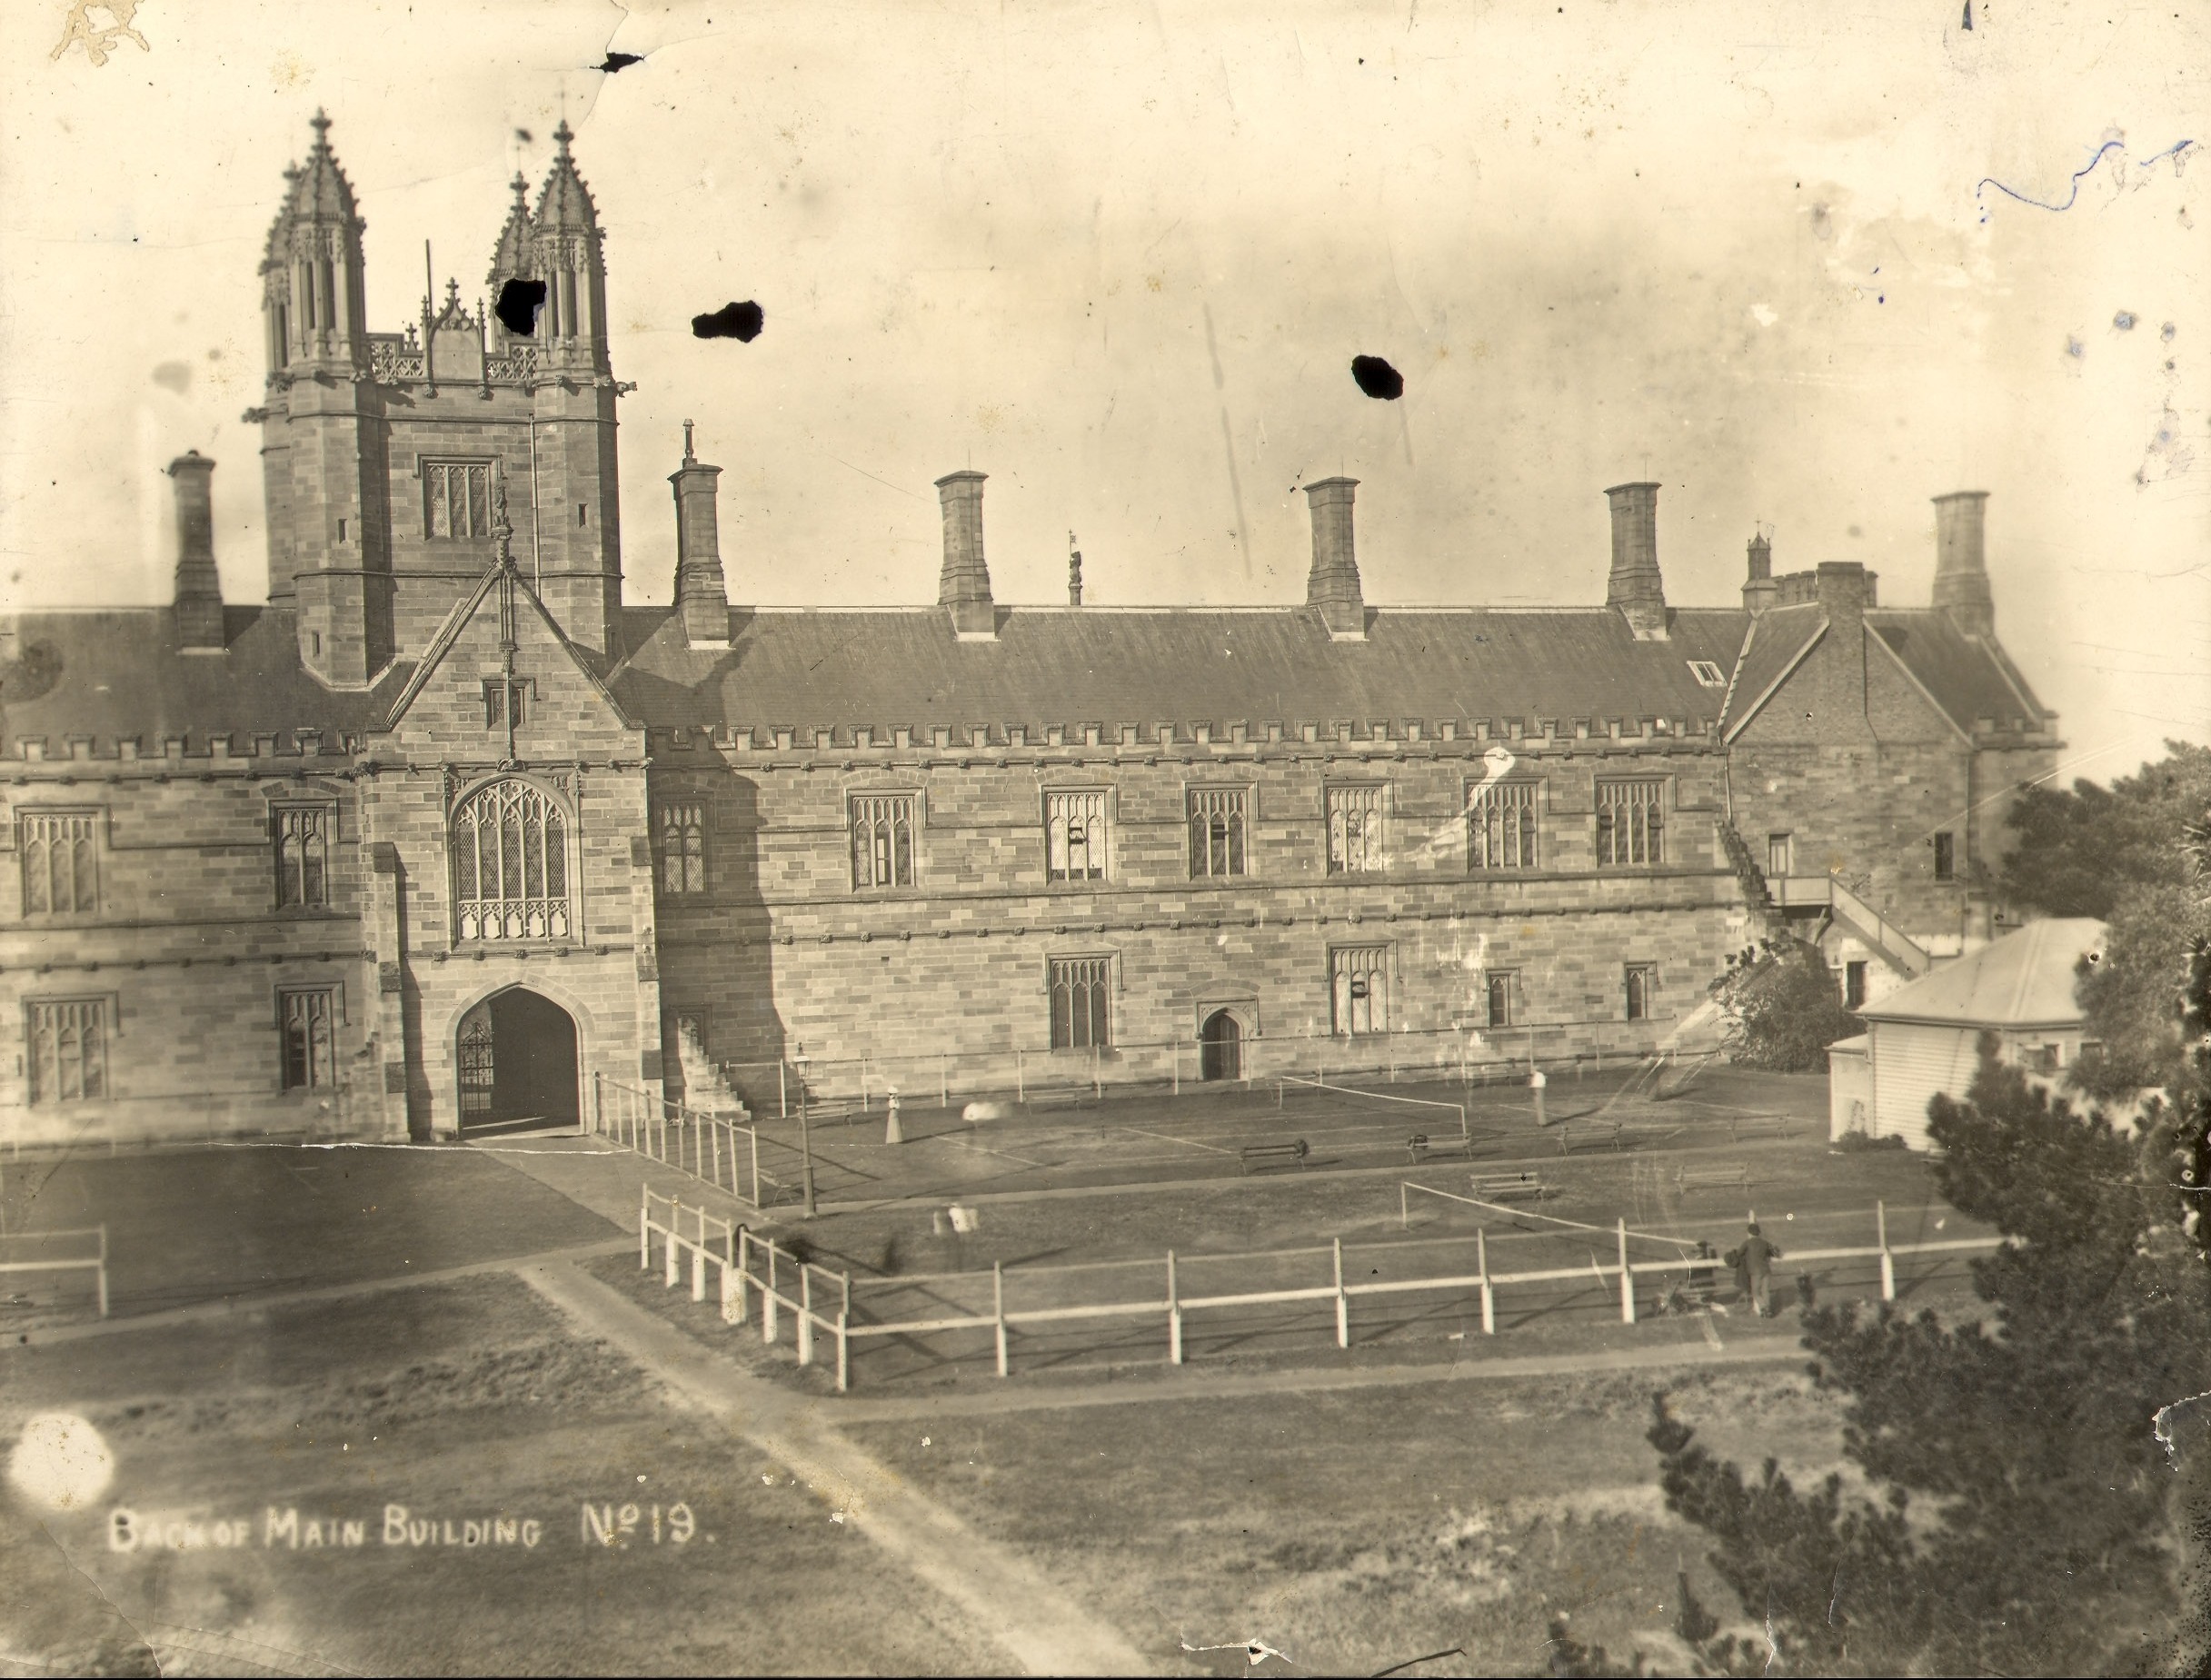 VIEW OF MAIN BUILDINGS WITH TENNIS COURT ON AREA NOW THE QUADRANGLE